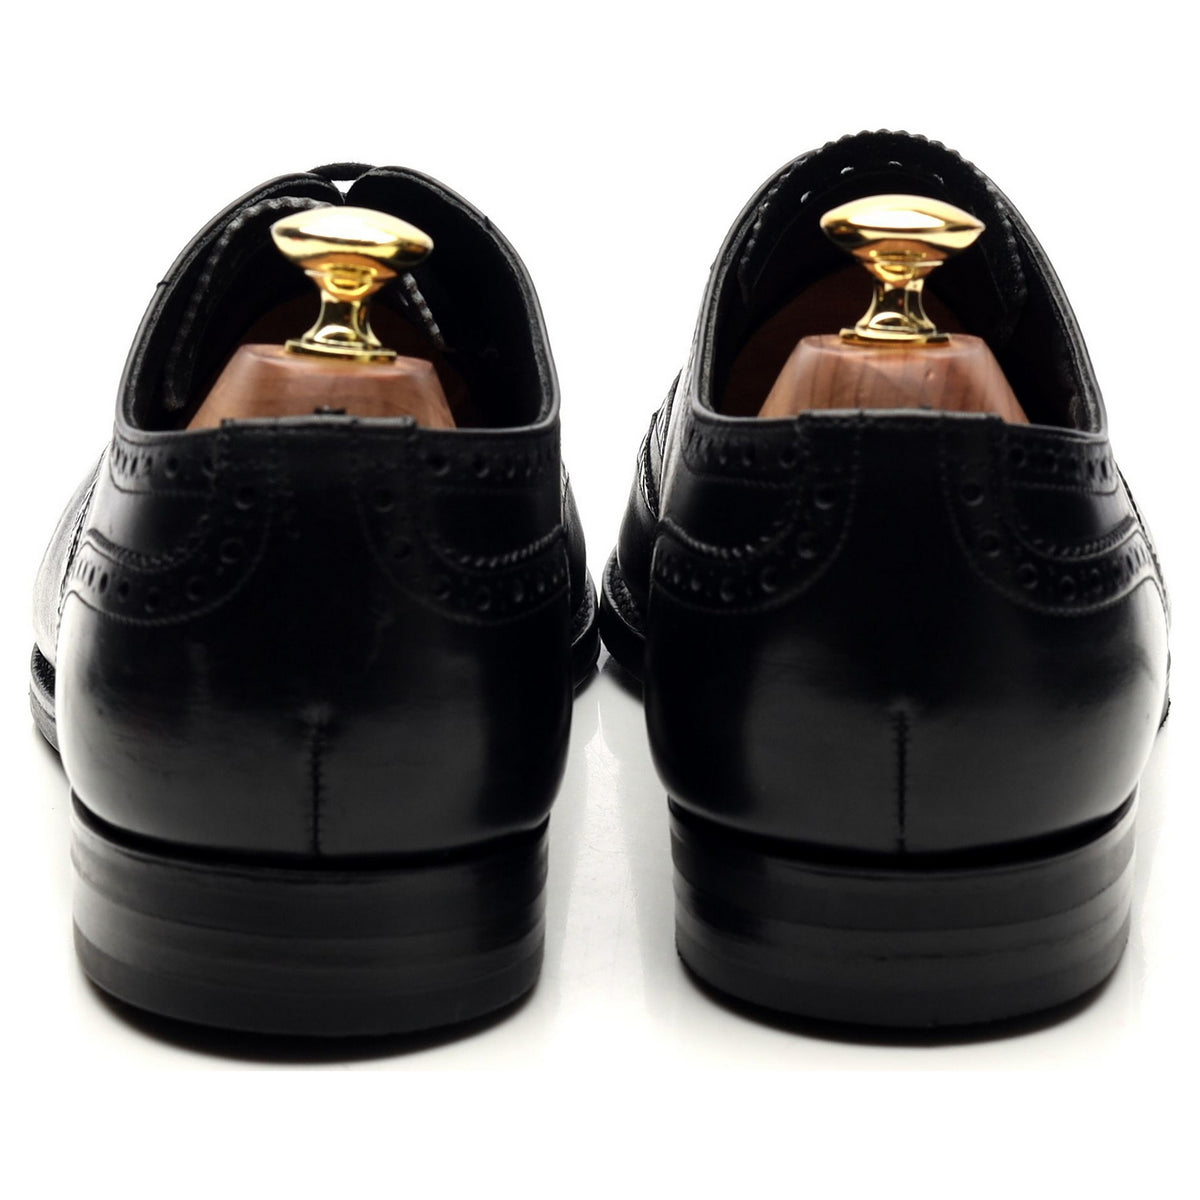 &#39;Parkstone&#39; Black Leather Oxford Brogues UK 8.5 G